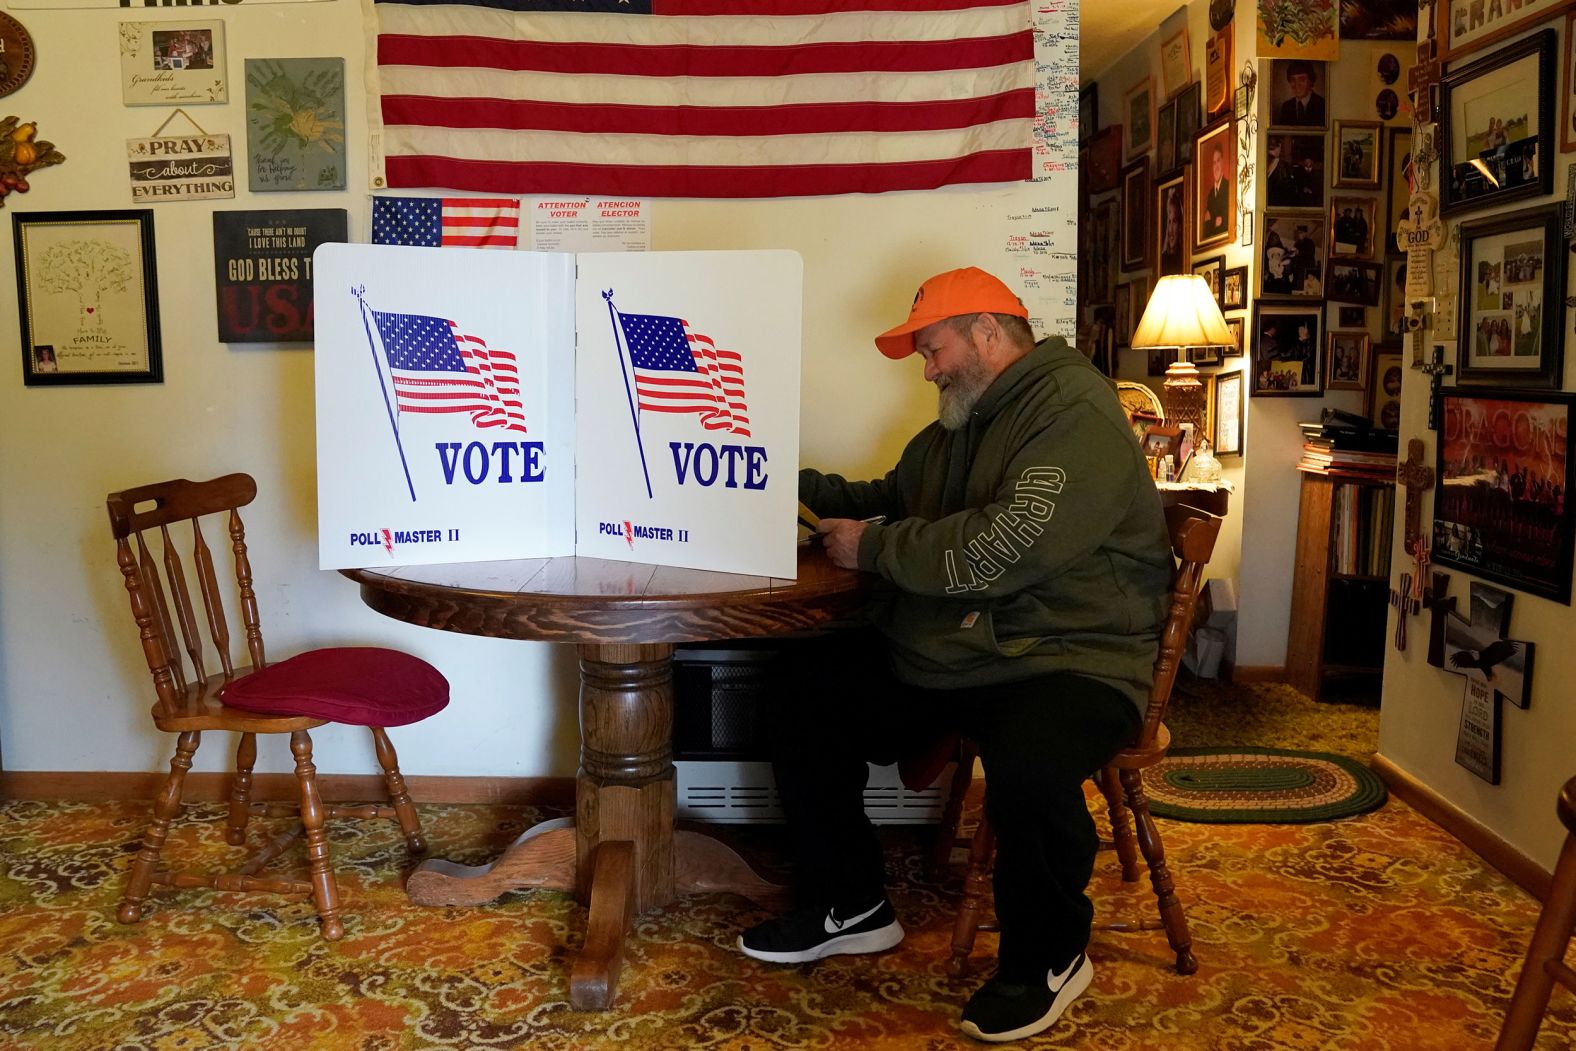 James "Pudge" Brown fills out his ballot in Linda Been's dining room in Tiger Mountain, Oklahoma. The Been family has operated a polling place on their property for over 100 years.